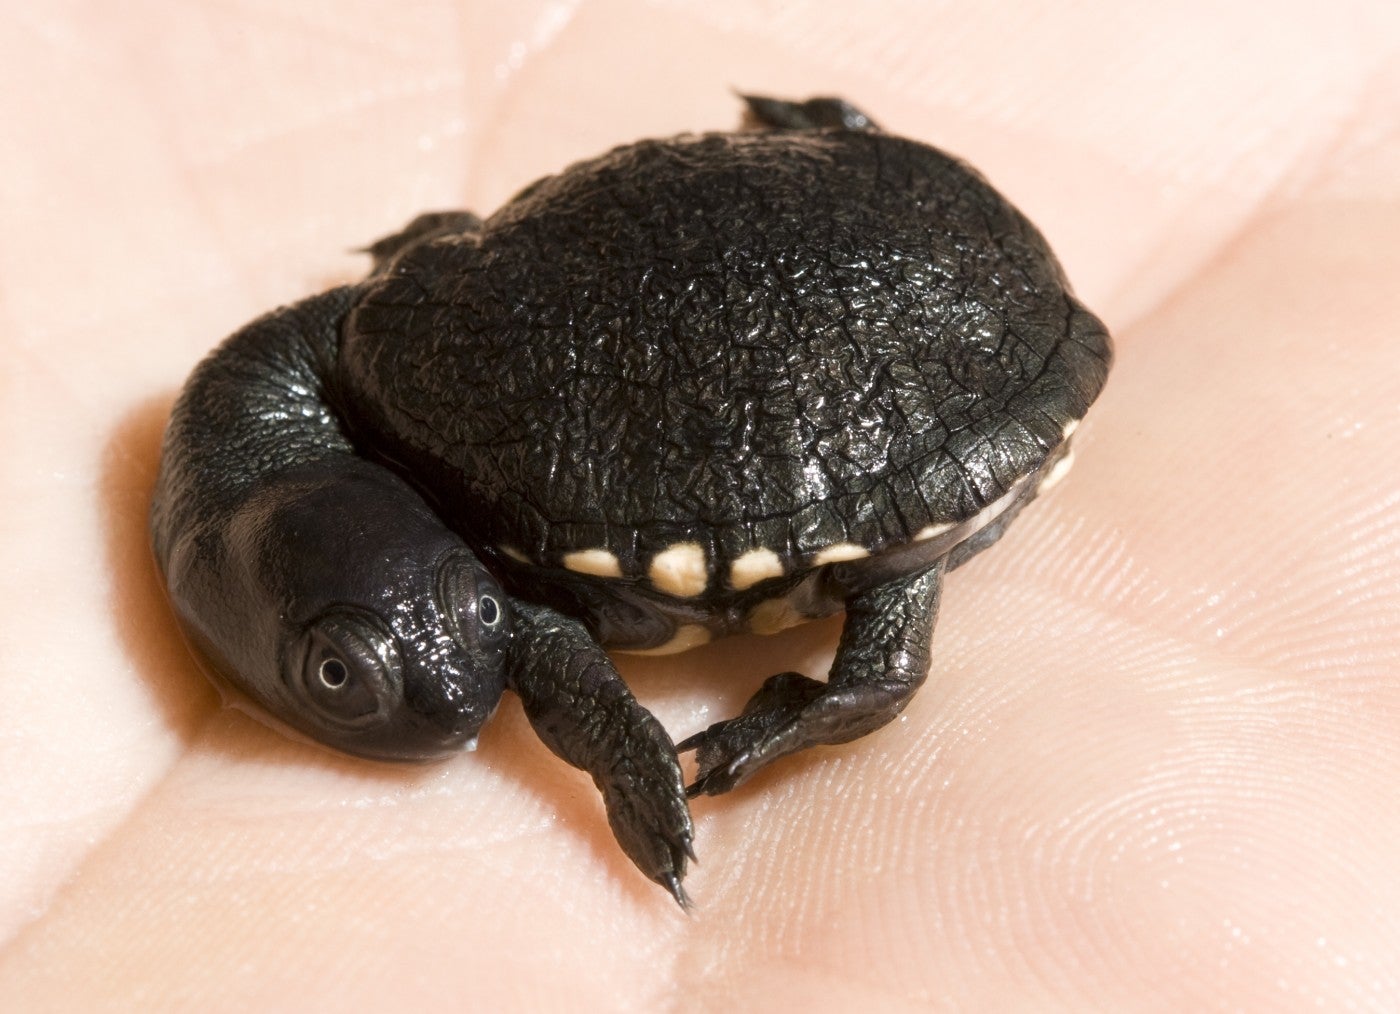 Snake-necked turtle hatchling in the palm of a hand.